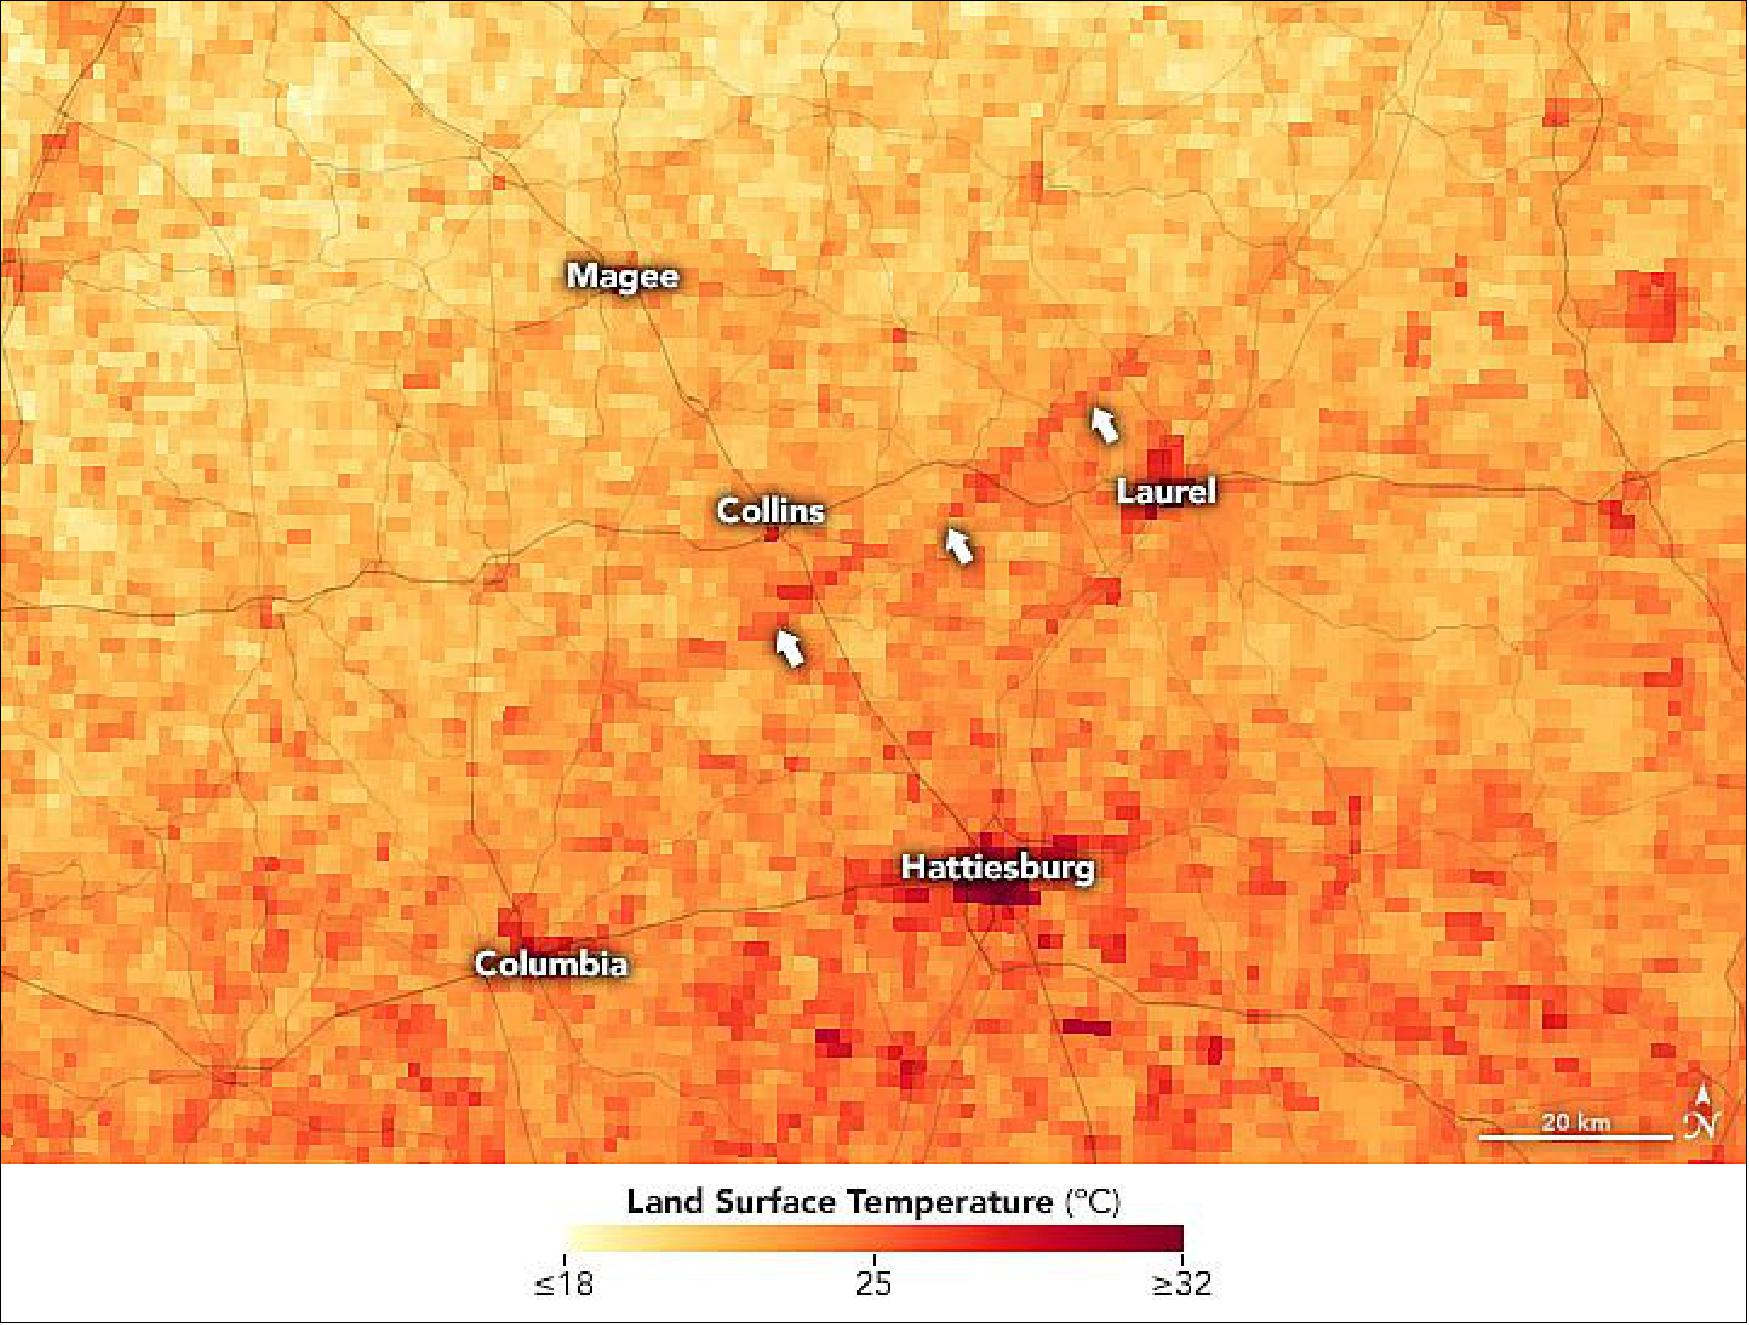 Figure 83: The signature of the scar is also apparent in this image, which shows land surface temperature data also acquired by Aqua MODIS. Damaged areas appear warmer than the surrounding landscape because bare ground heats up faster than vegetated areas (A similar phenomenon was observed in 2018 in the damage associated with hail storms), image credit: NASA Earth Observatory